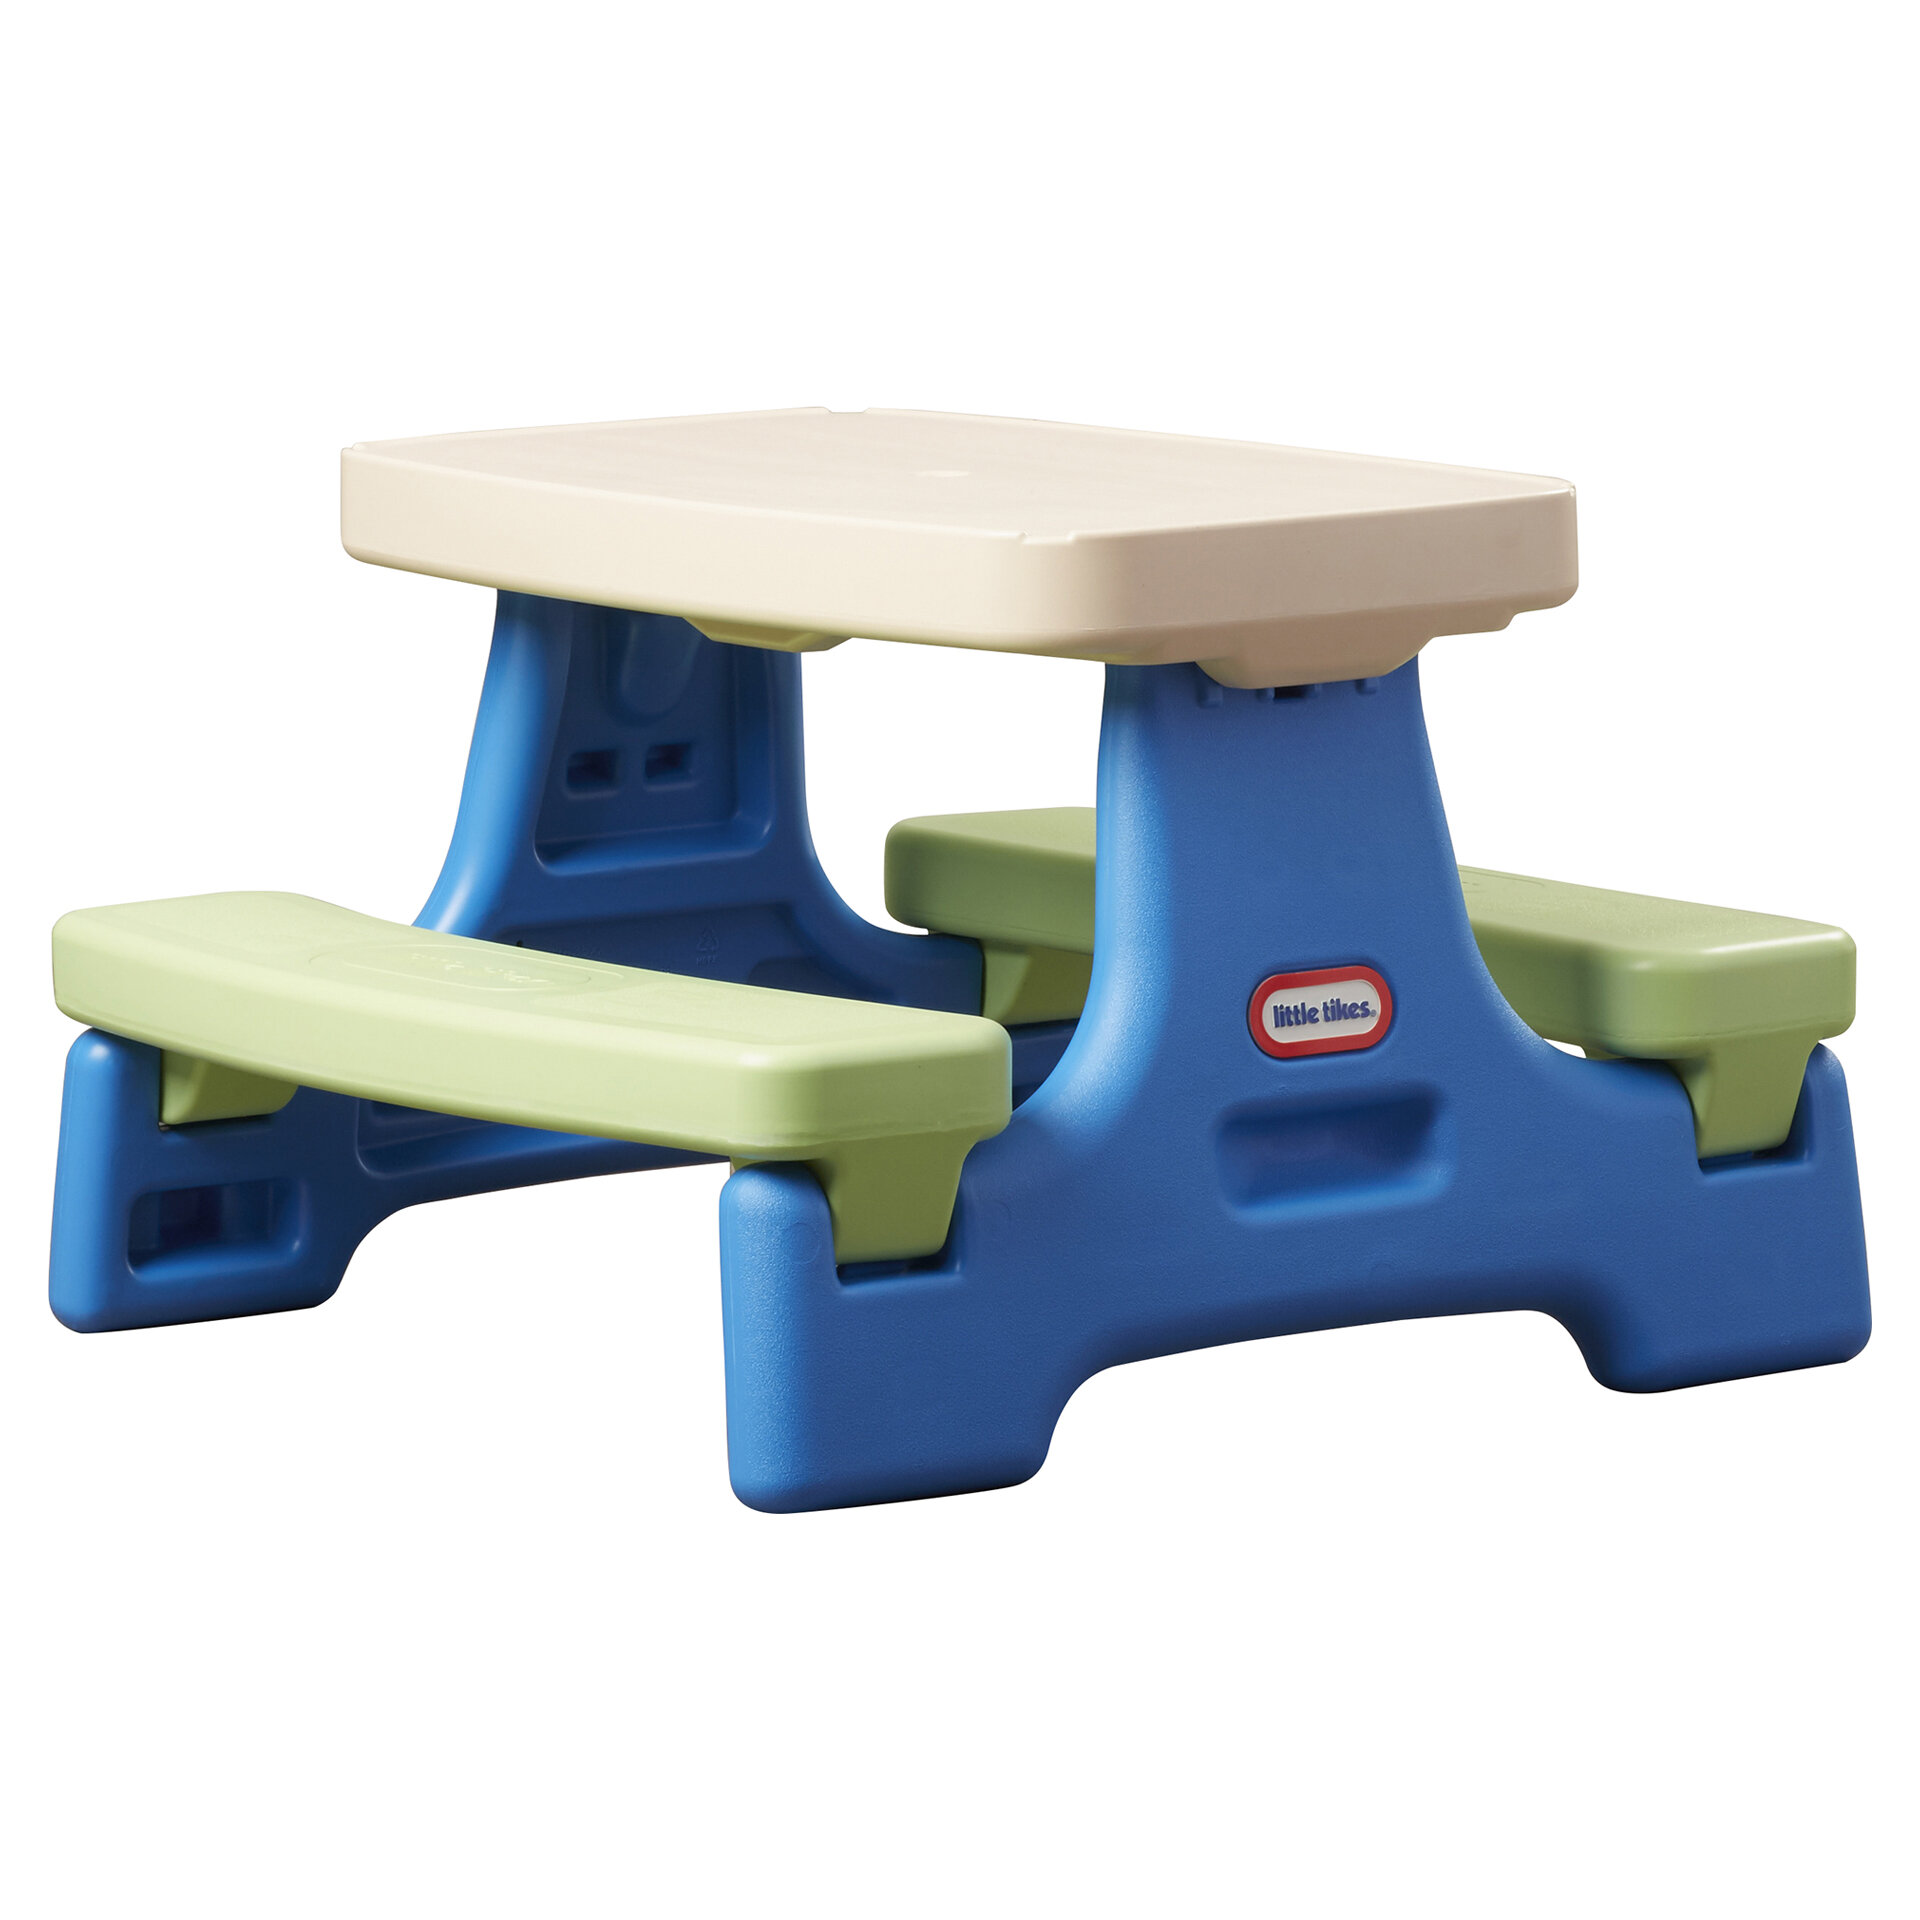 little tikes picnic table used